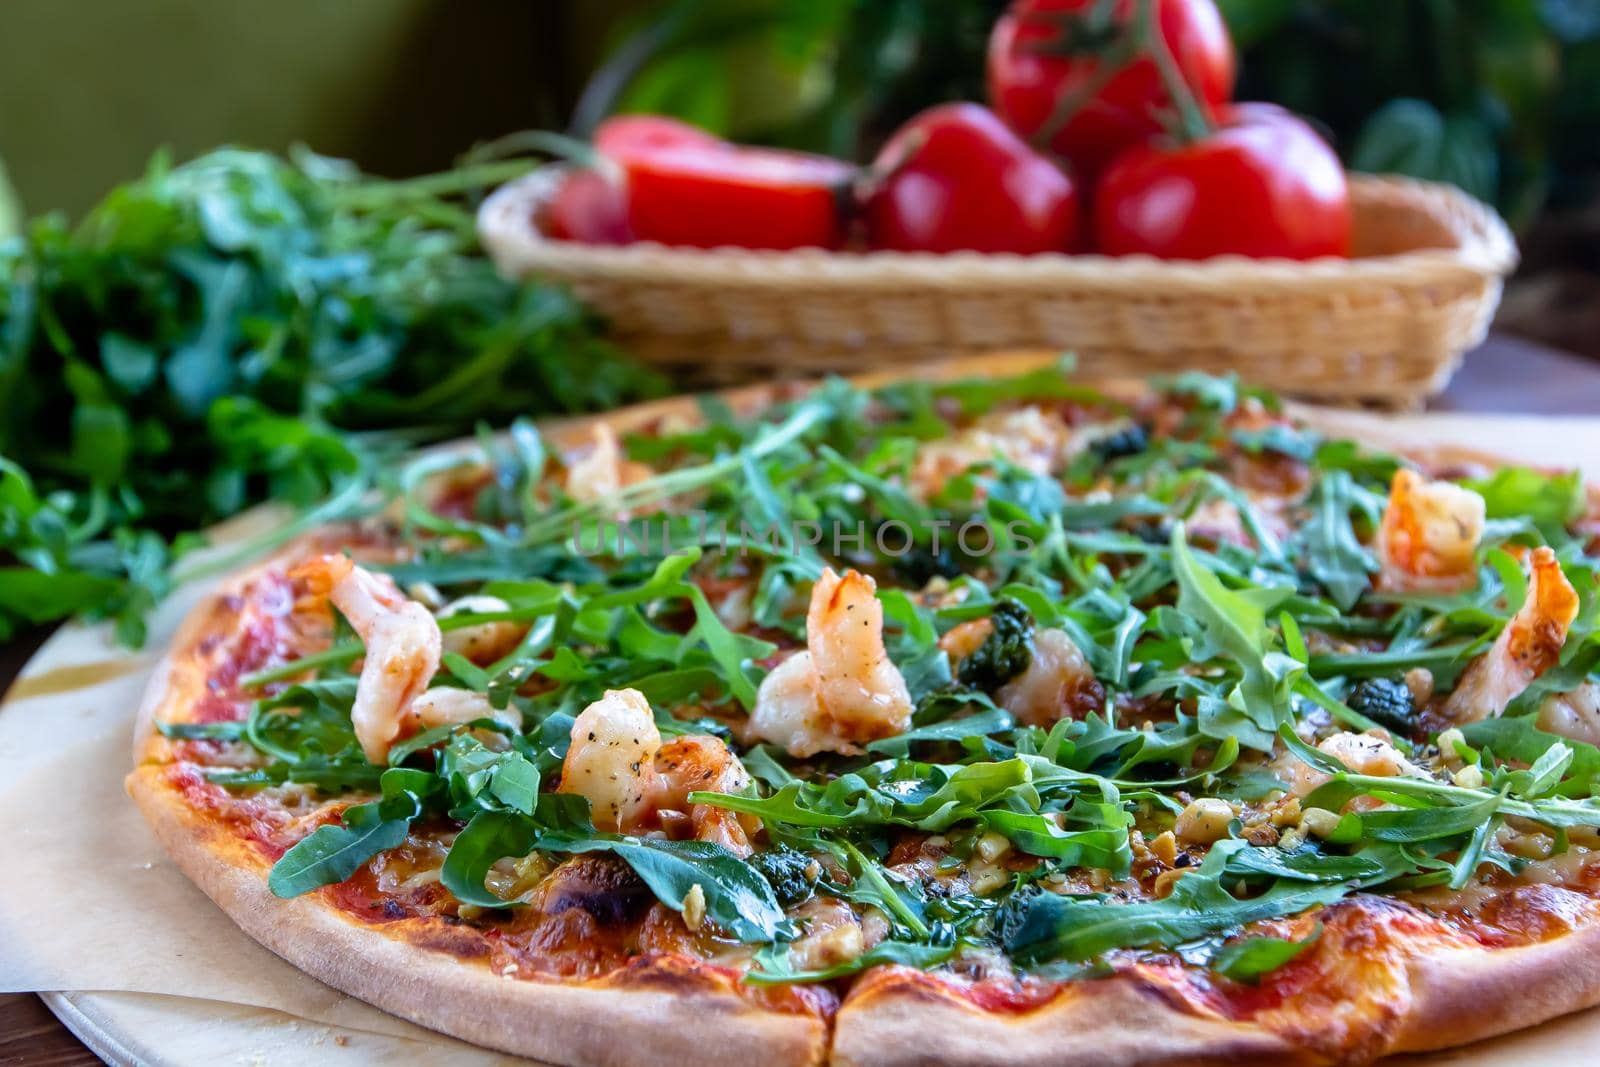 Delicious rustic Italian pizza with grilled Adriatic shrimps, mozzarella, sun dried tomatoes, arugula and parmesan cheese by Milanchikov